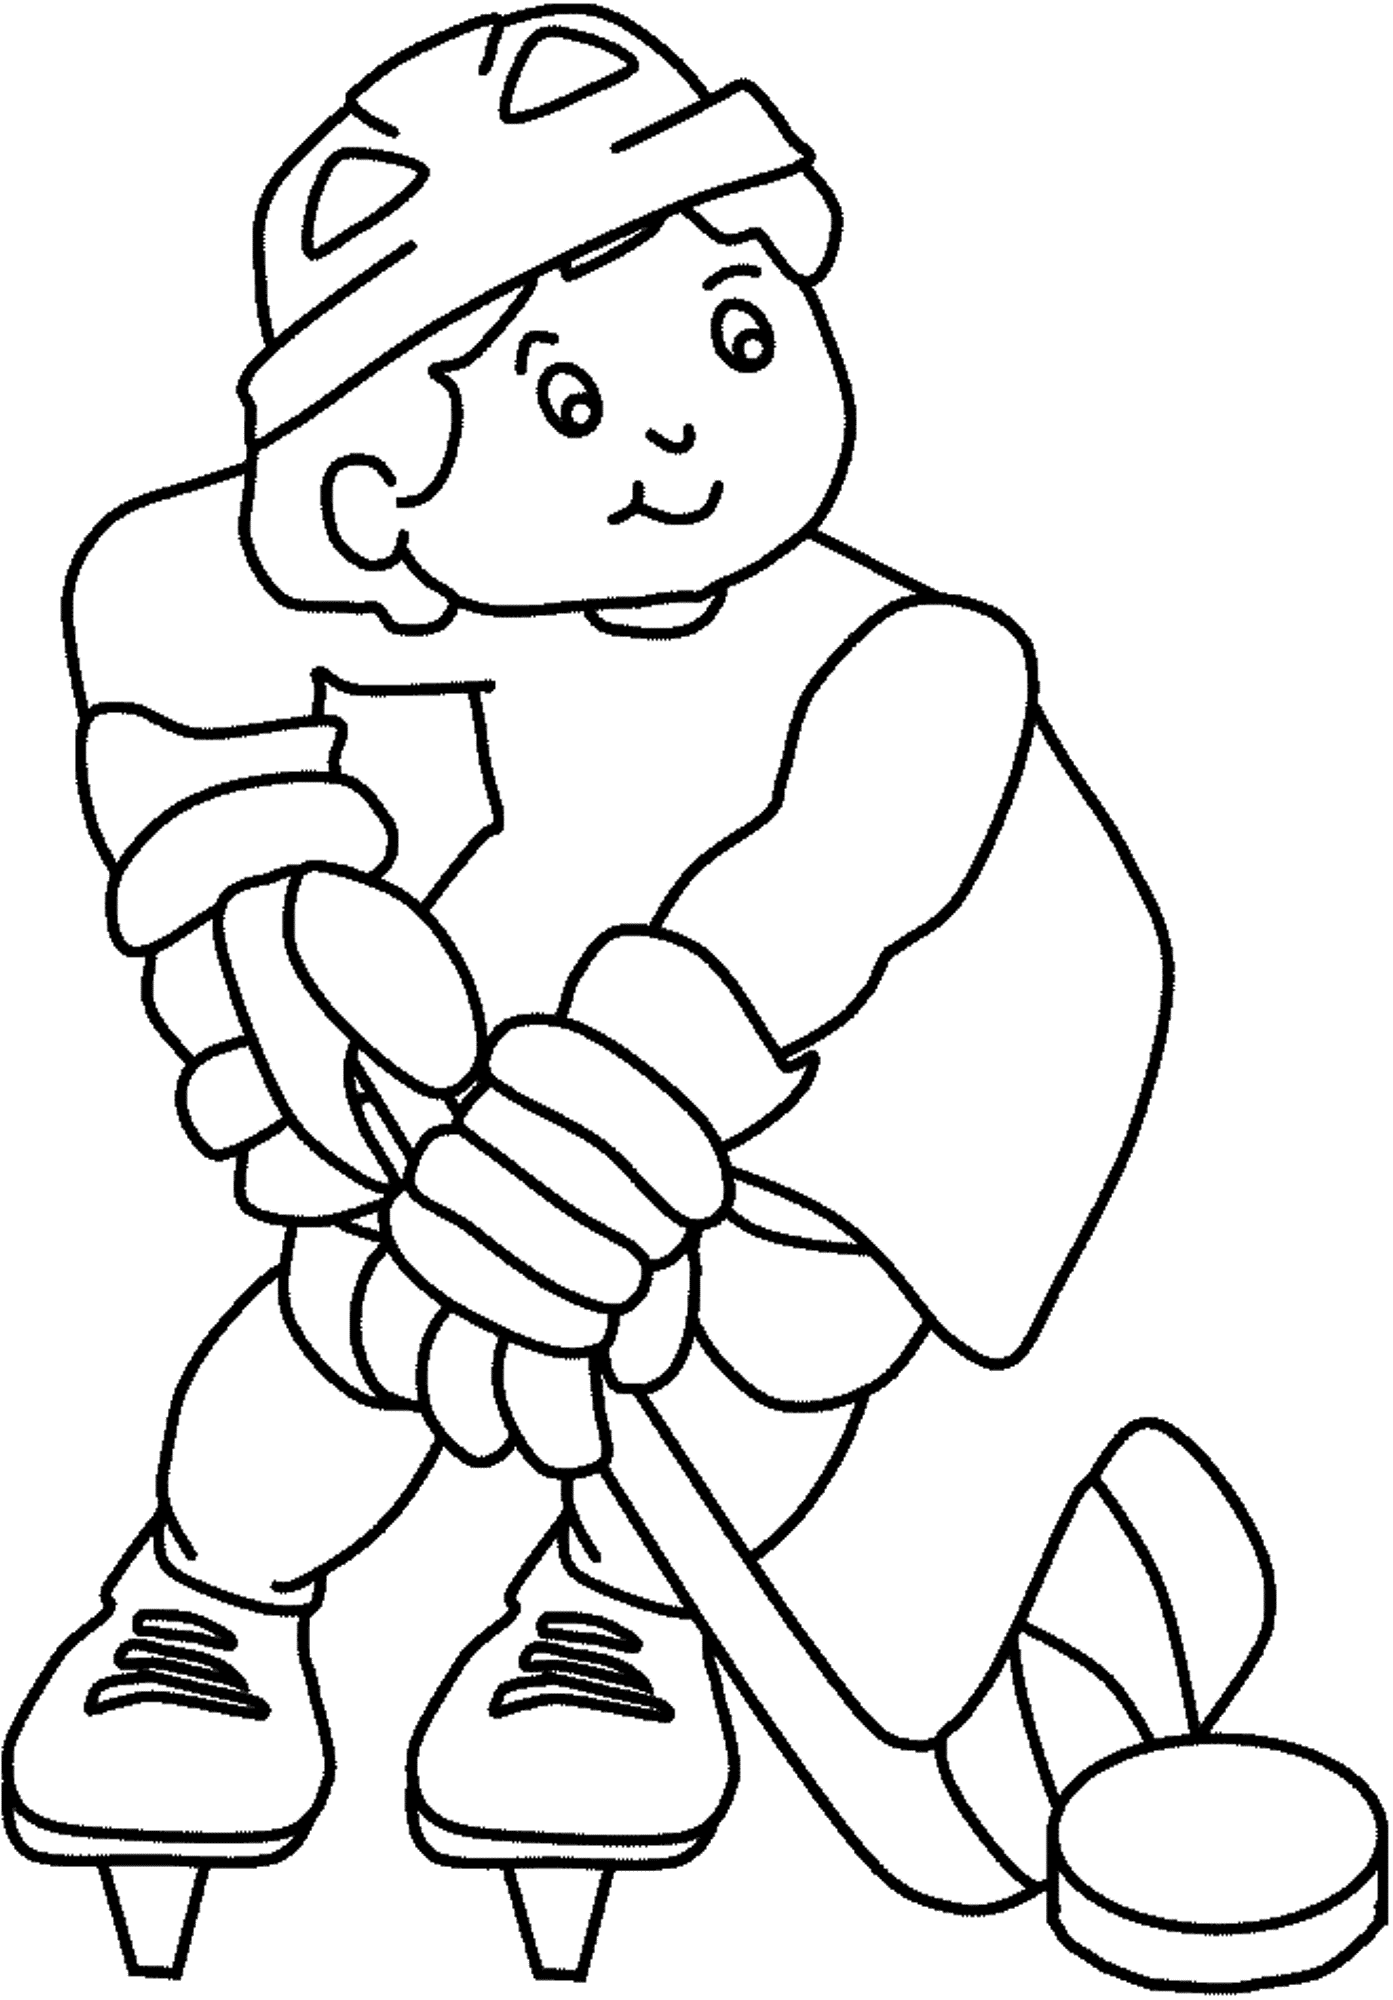 ice hockey player coloring pages